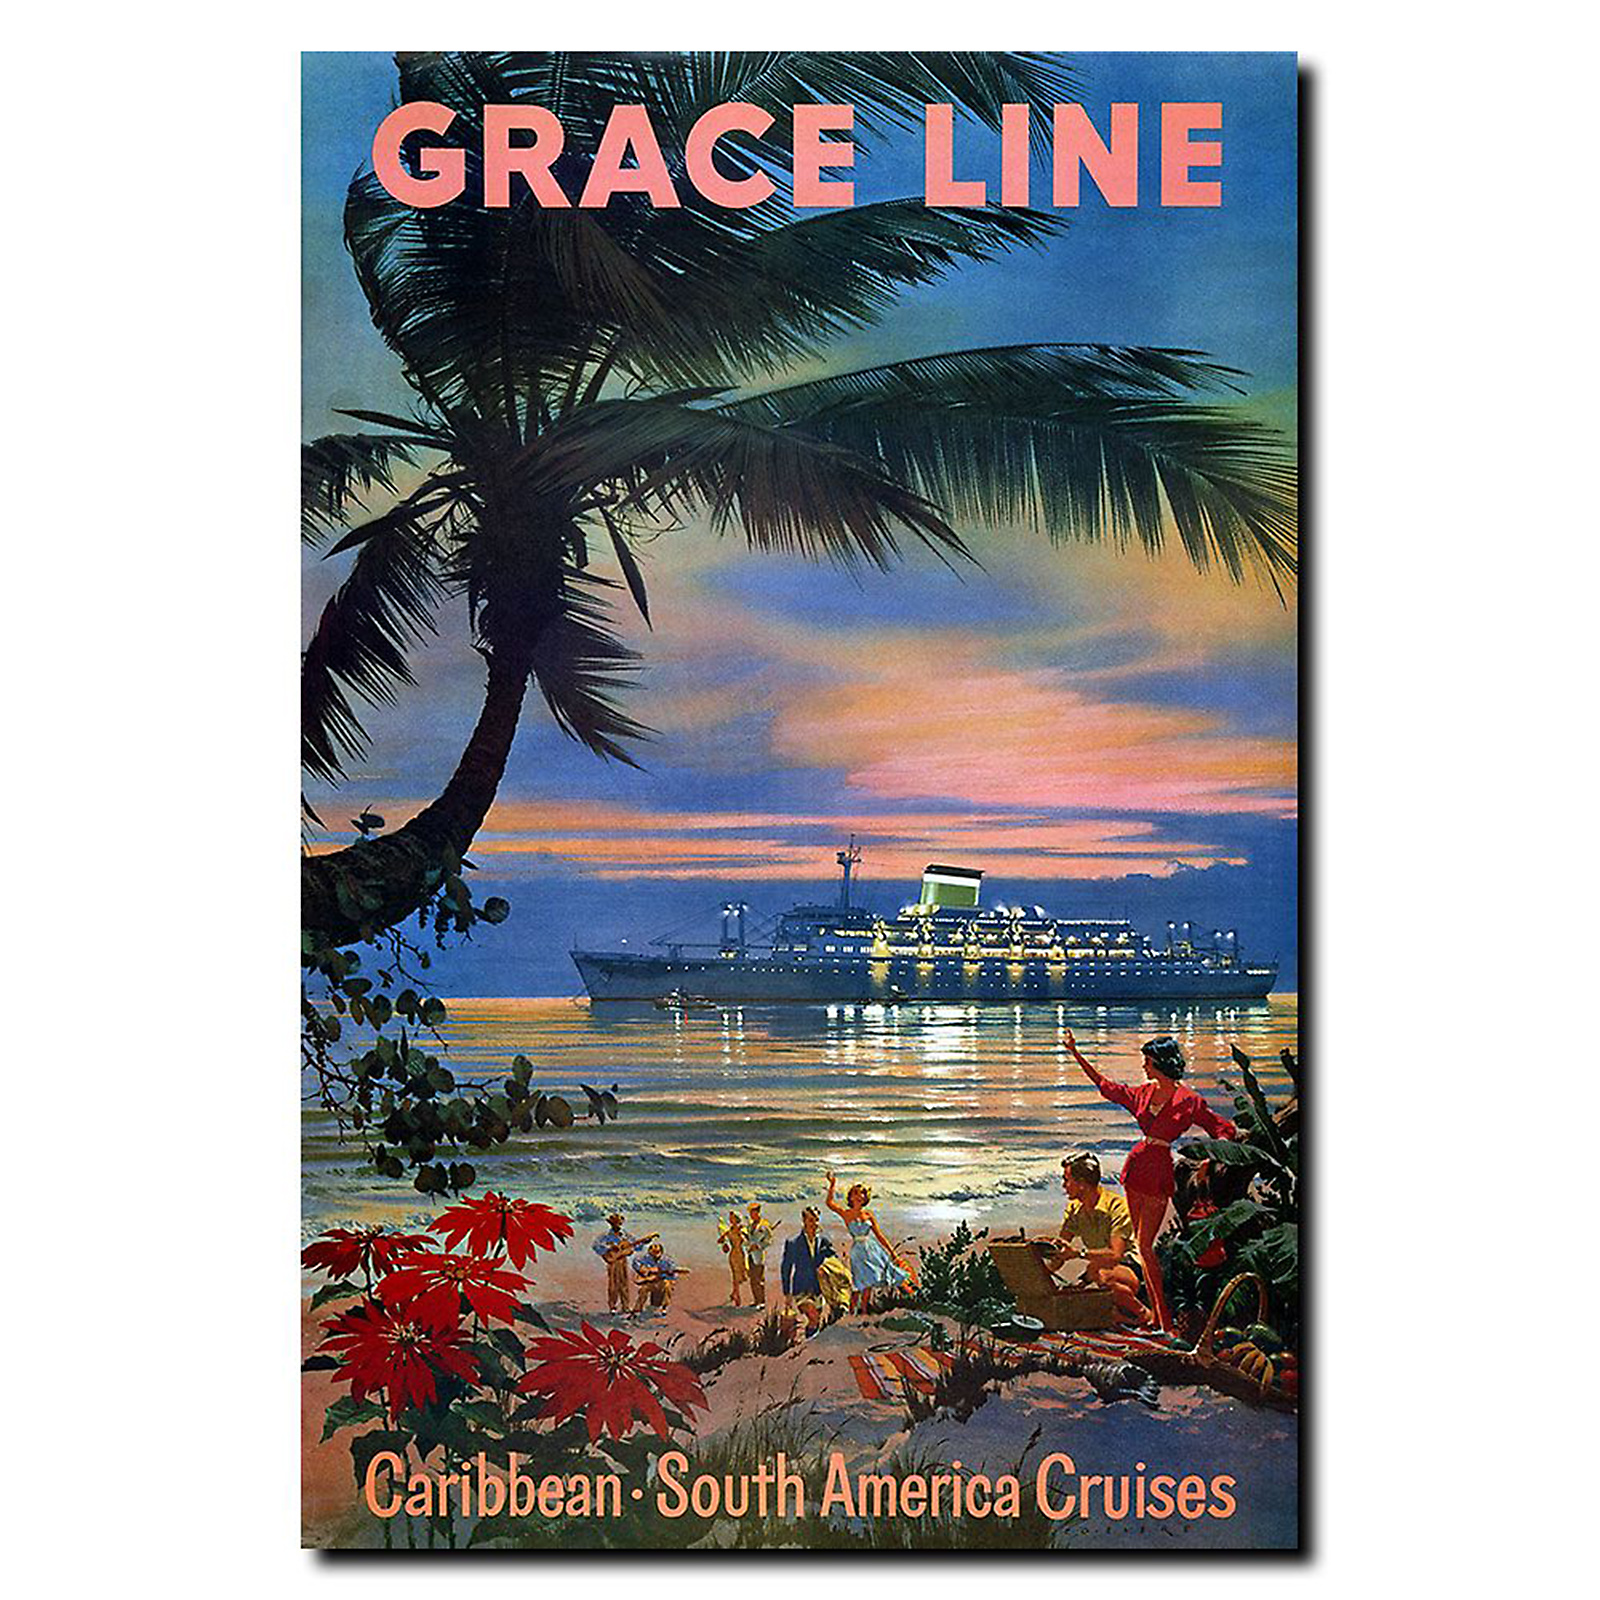 Trademark Global 18x24 inches "Grace Line Cruises"